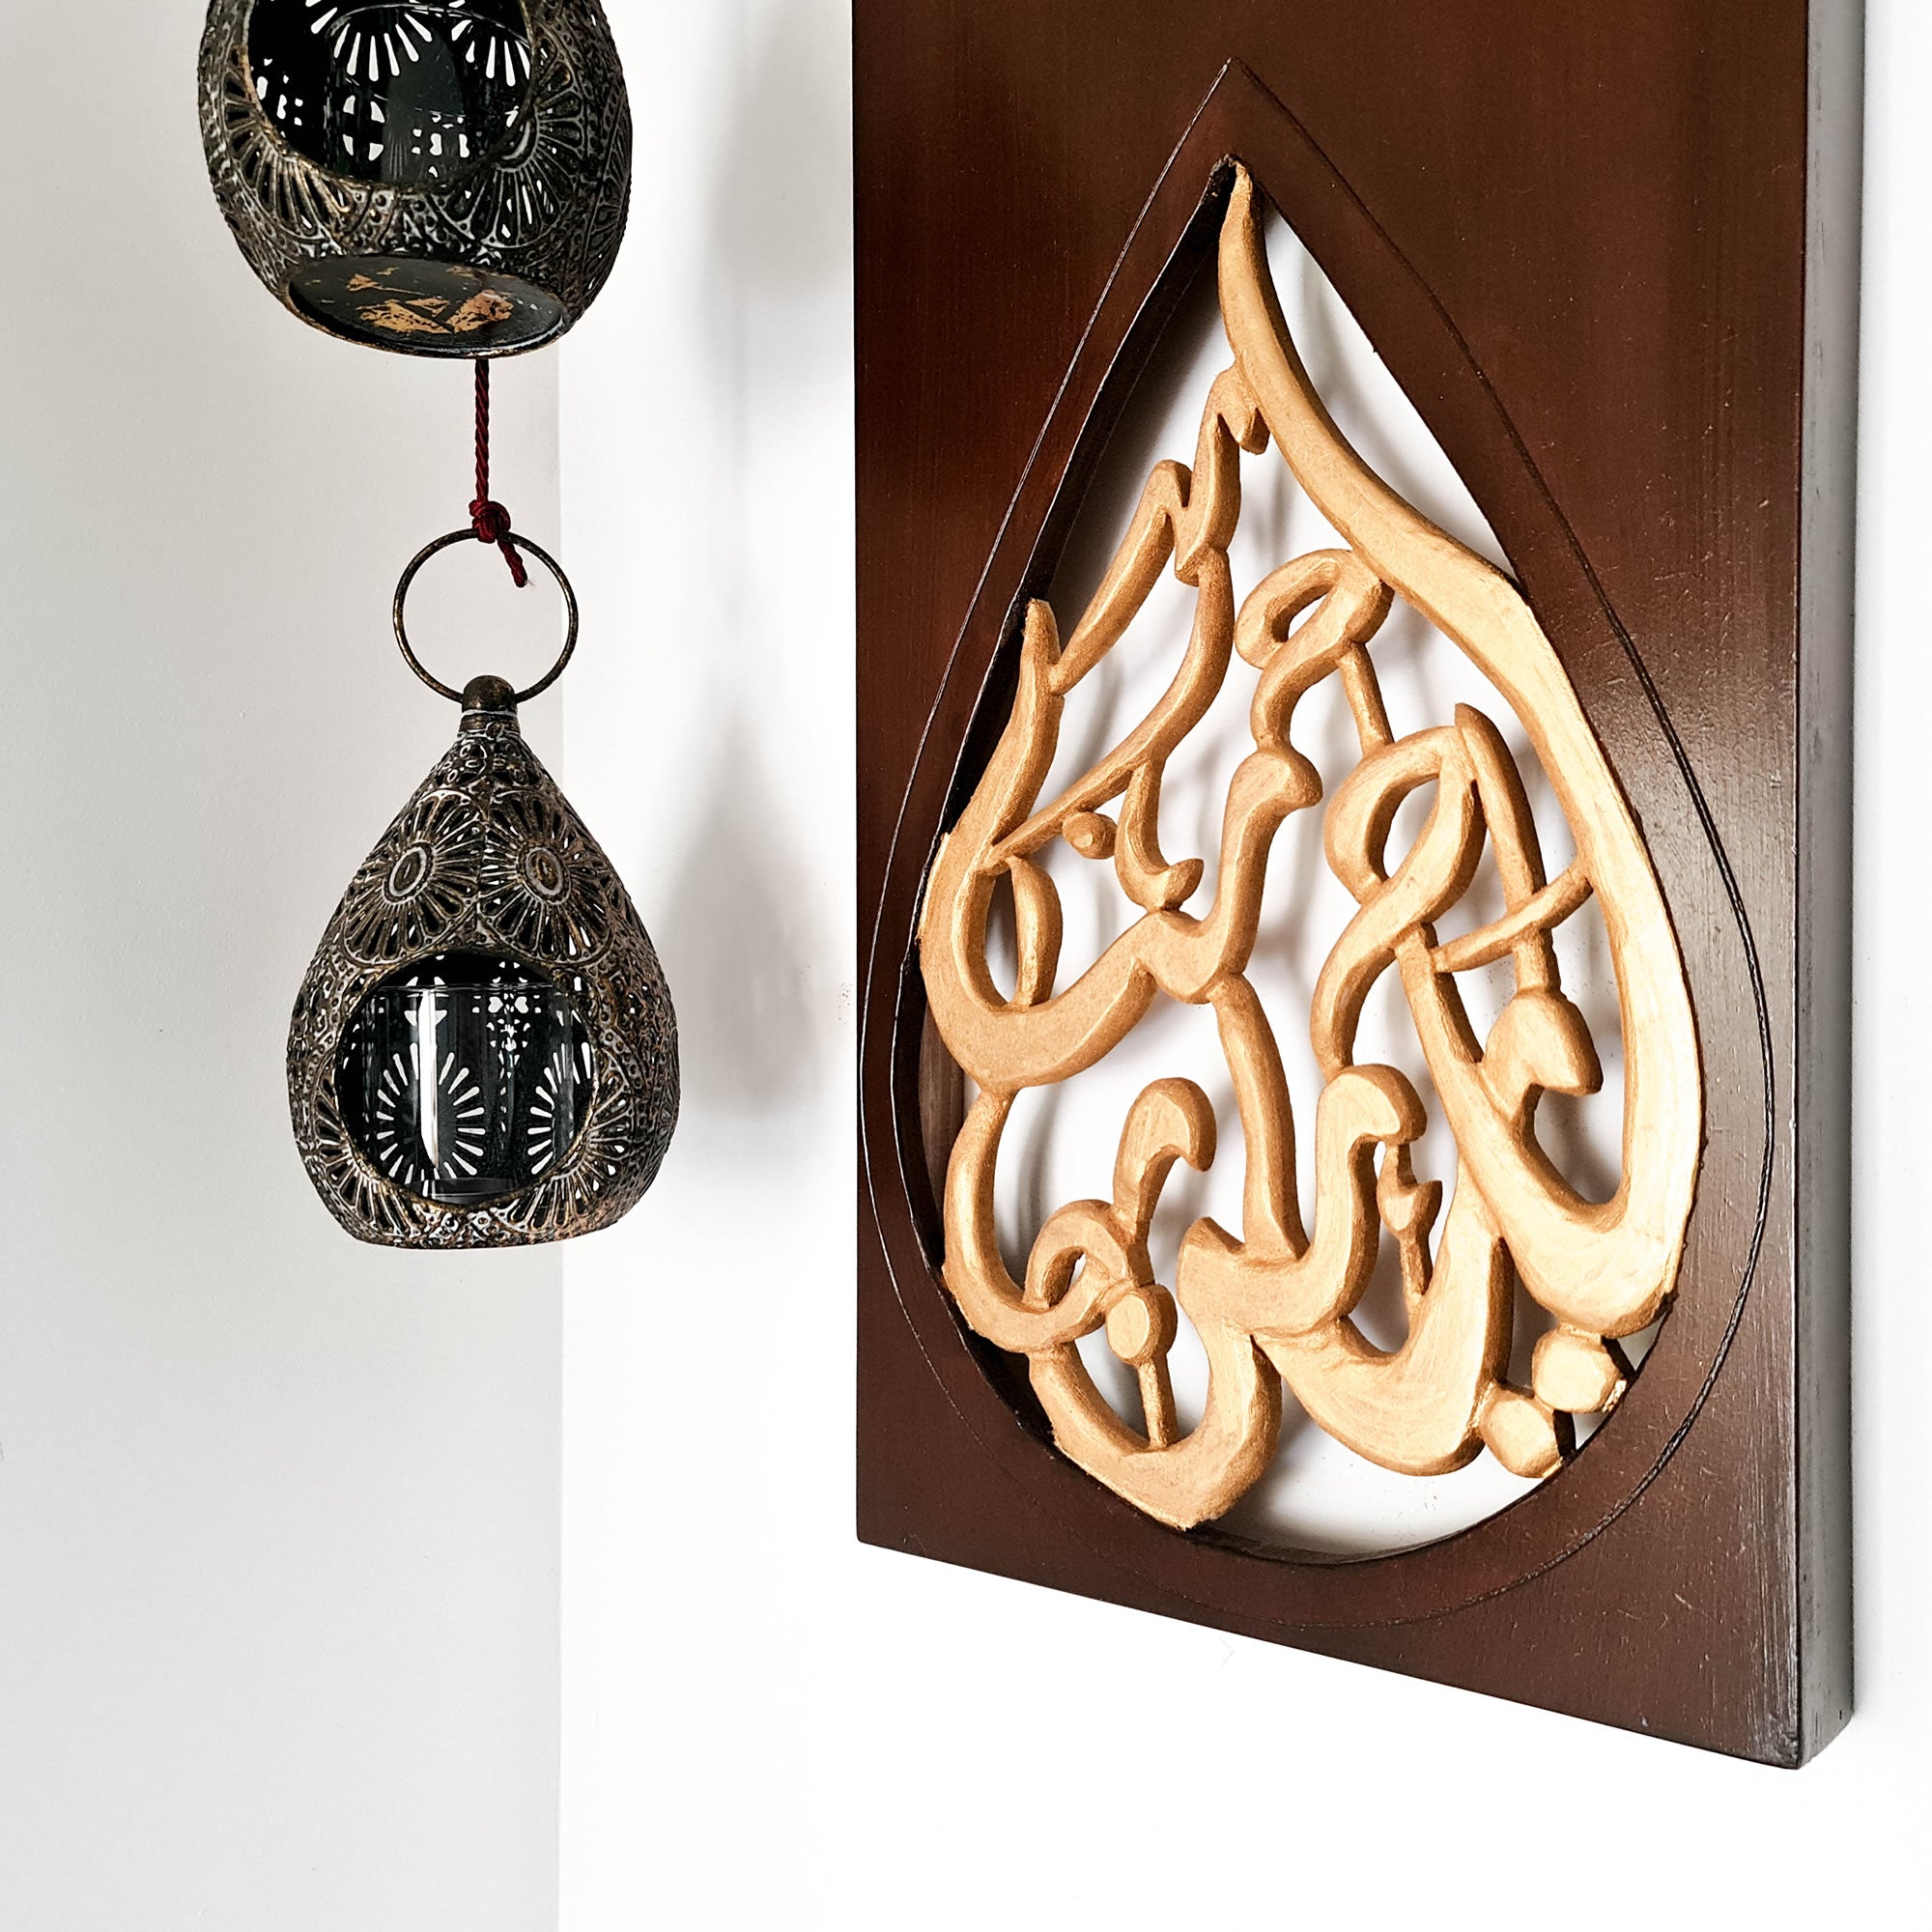 A stunning hand-carved wooden decorative wall art inspired by Islamic Arabic Calligraphy. A beauty to add to your interior walls to add a touch of elegance.